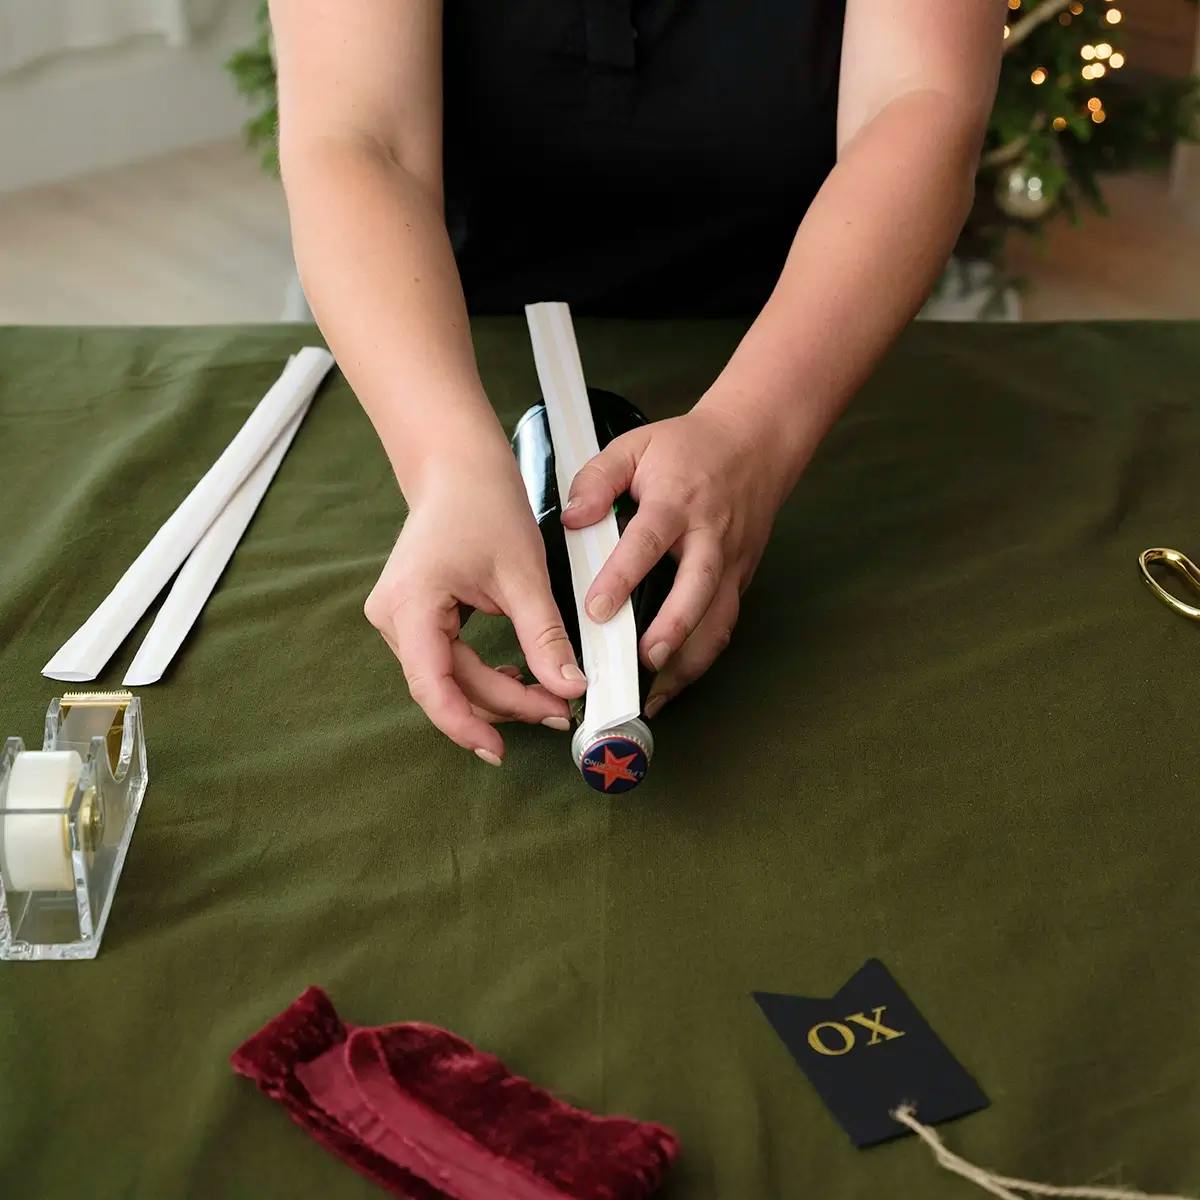 Taping wrapping paper to a wine bottle.